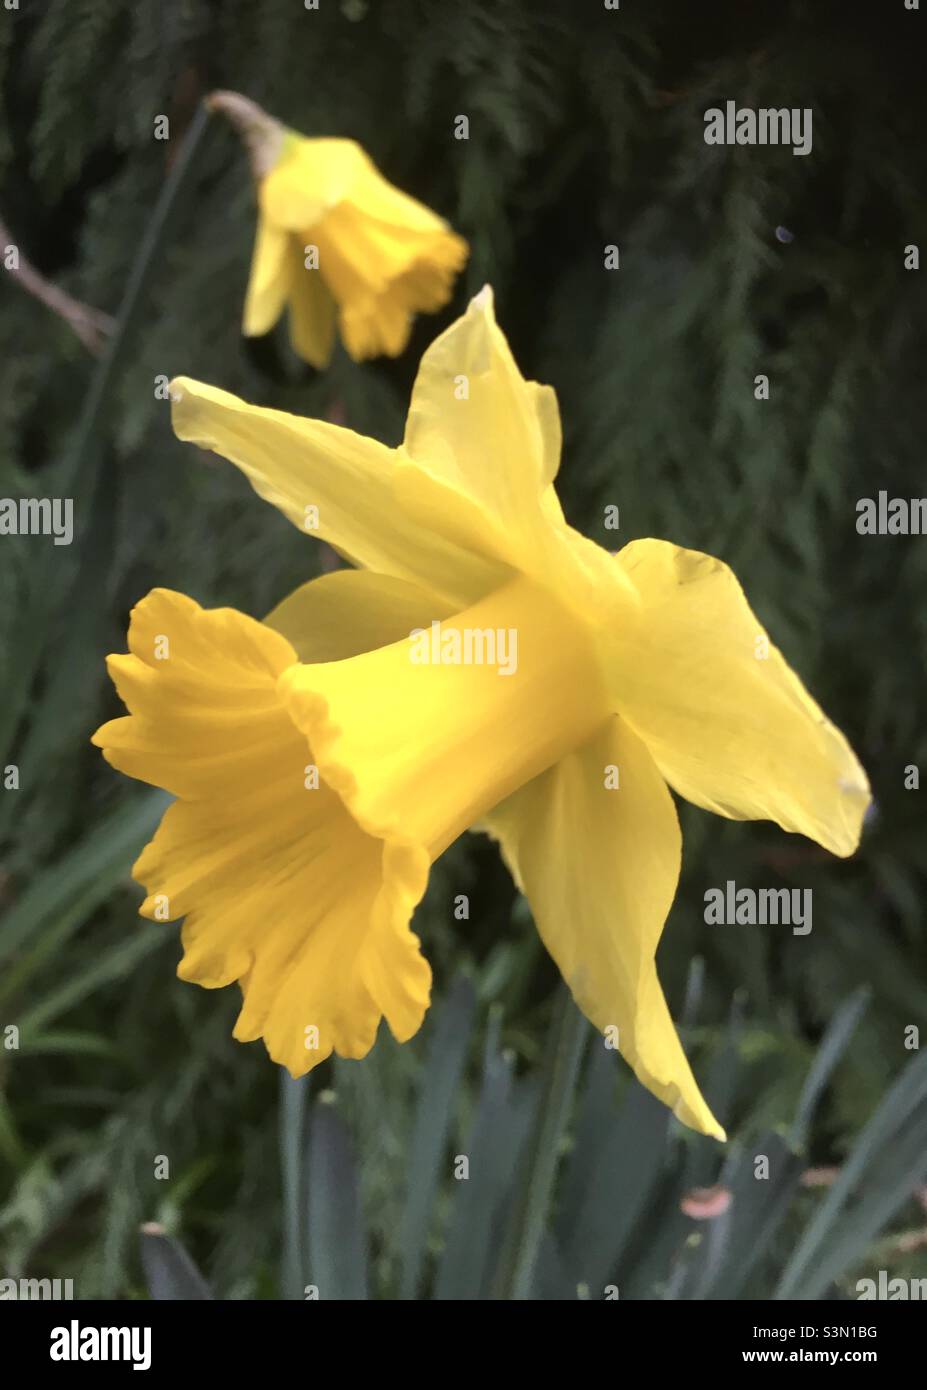 Daffodils, yellow, gold, spring, green, nature, flowers, uplift Stock Photo